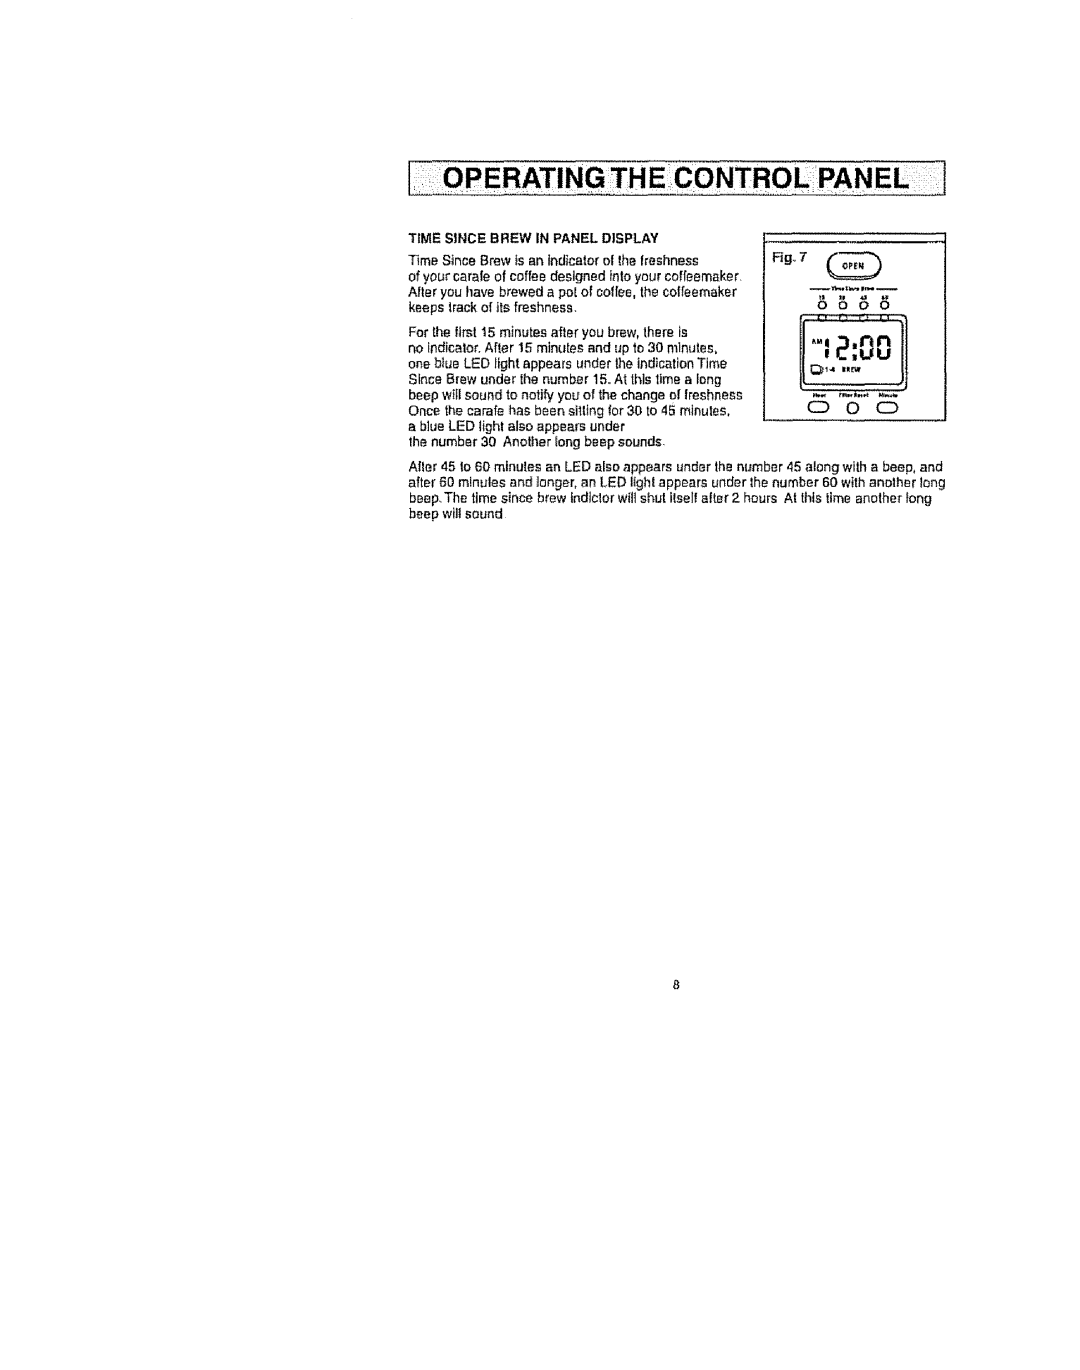 Kenmore 100.90007 operating instructions C O C, IJ,.,2 oo, Time Since Brew In Panel Display 